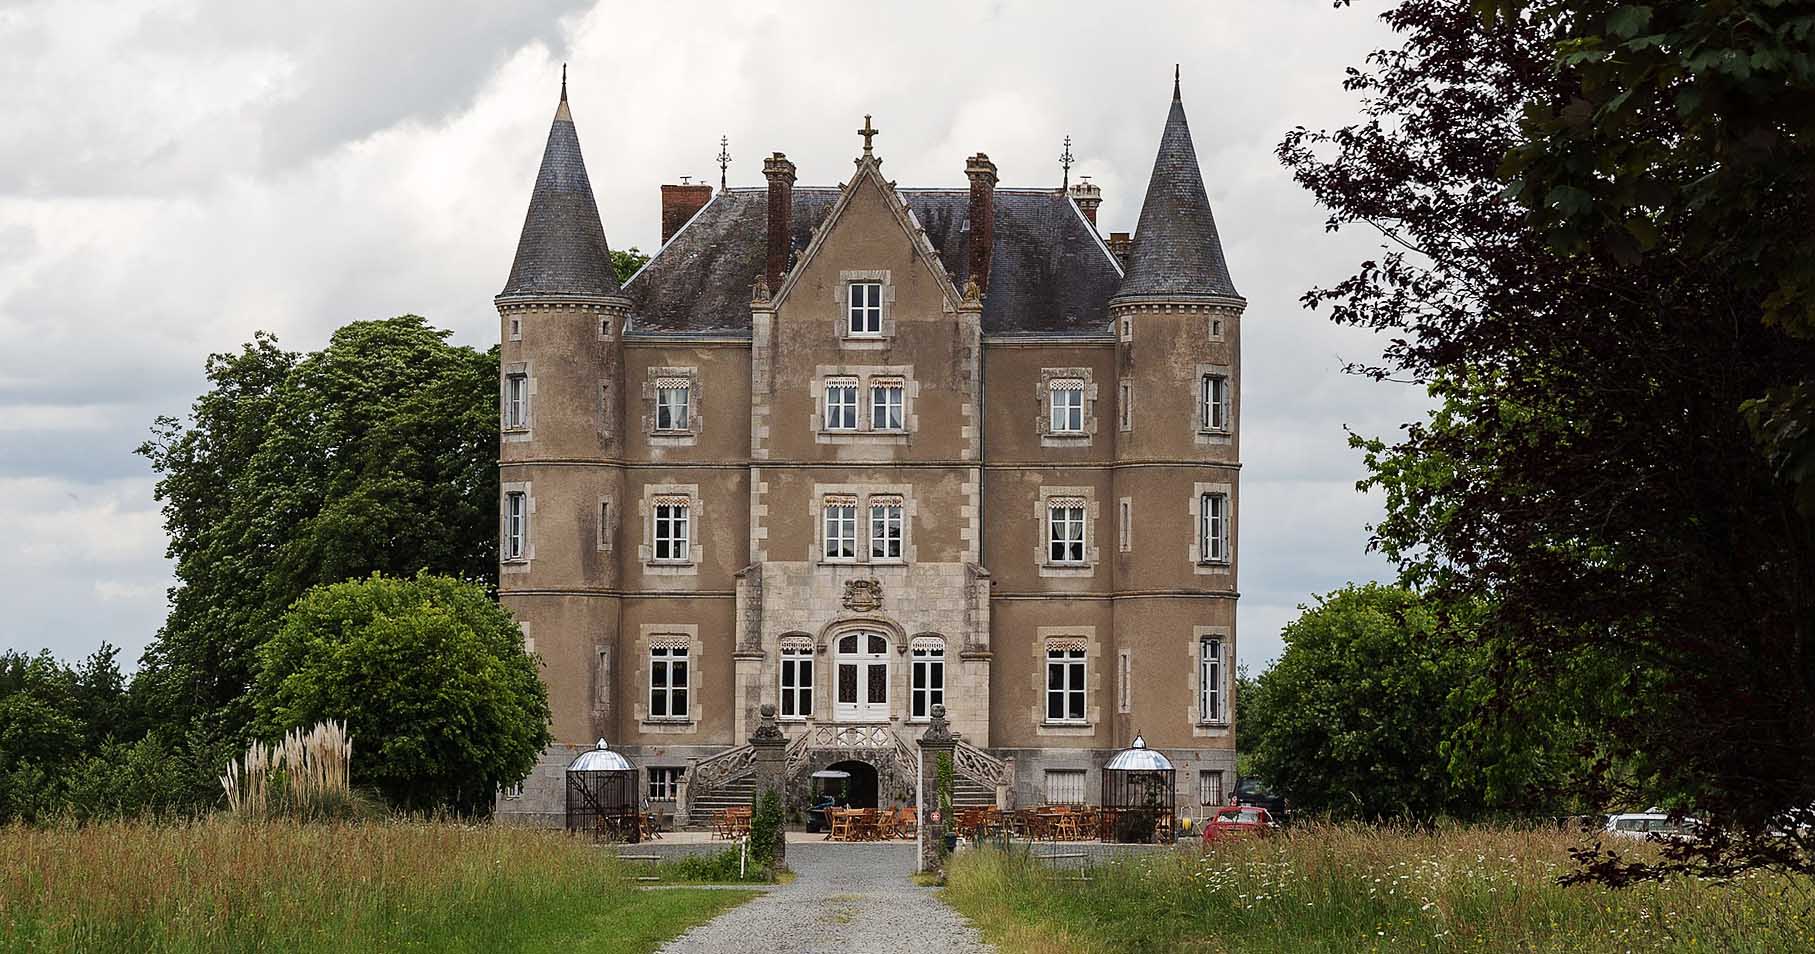 This Chateau is the stage of one of the 10 tv shows for antique lovers.